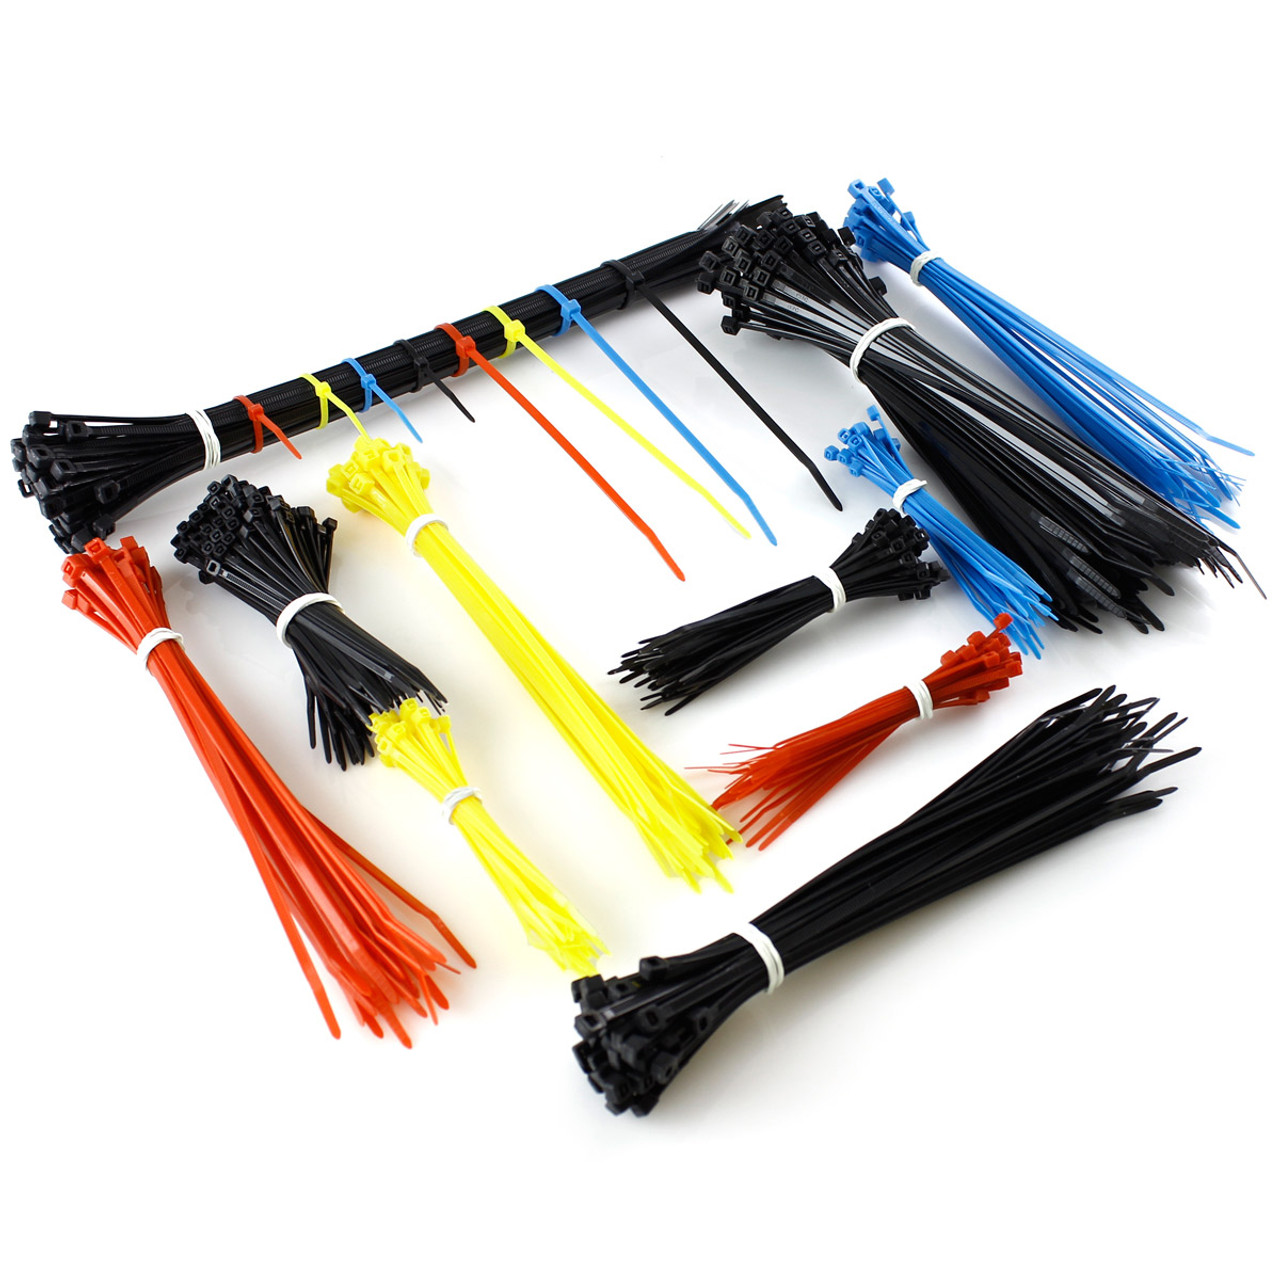 TR Industrial Assorted Nylon Cable Ties Set, 500 Pack of Assorted Colors and Sizes